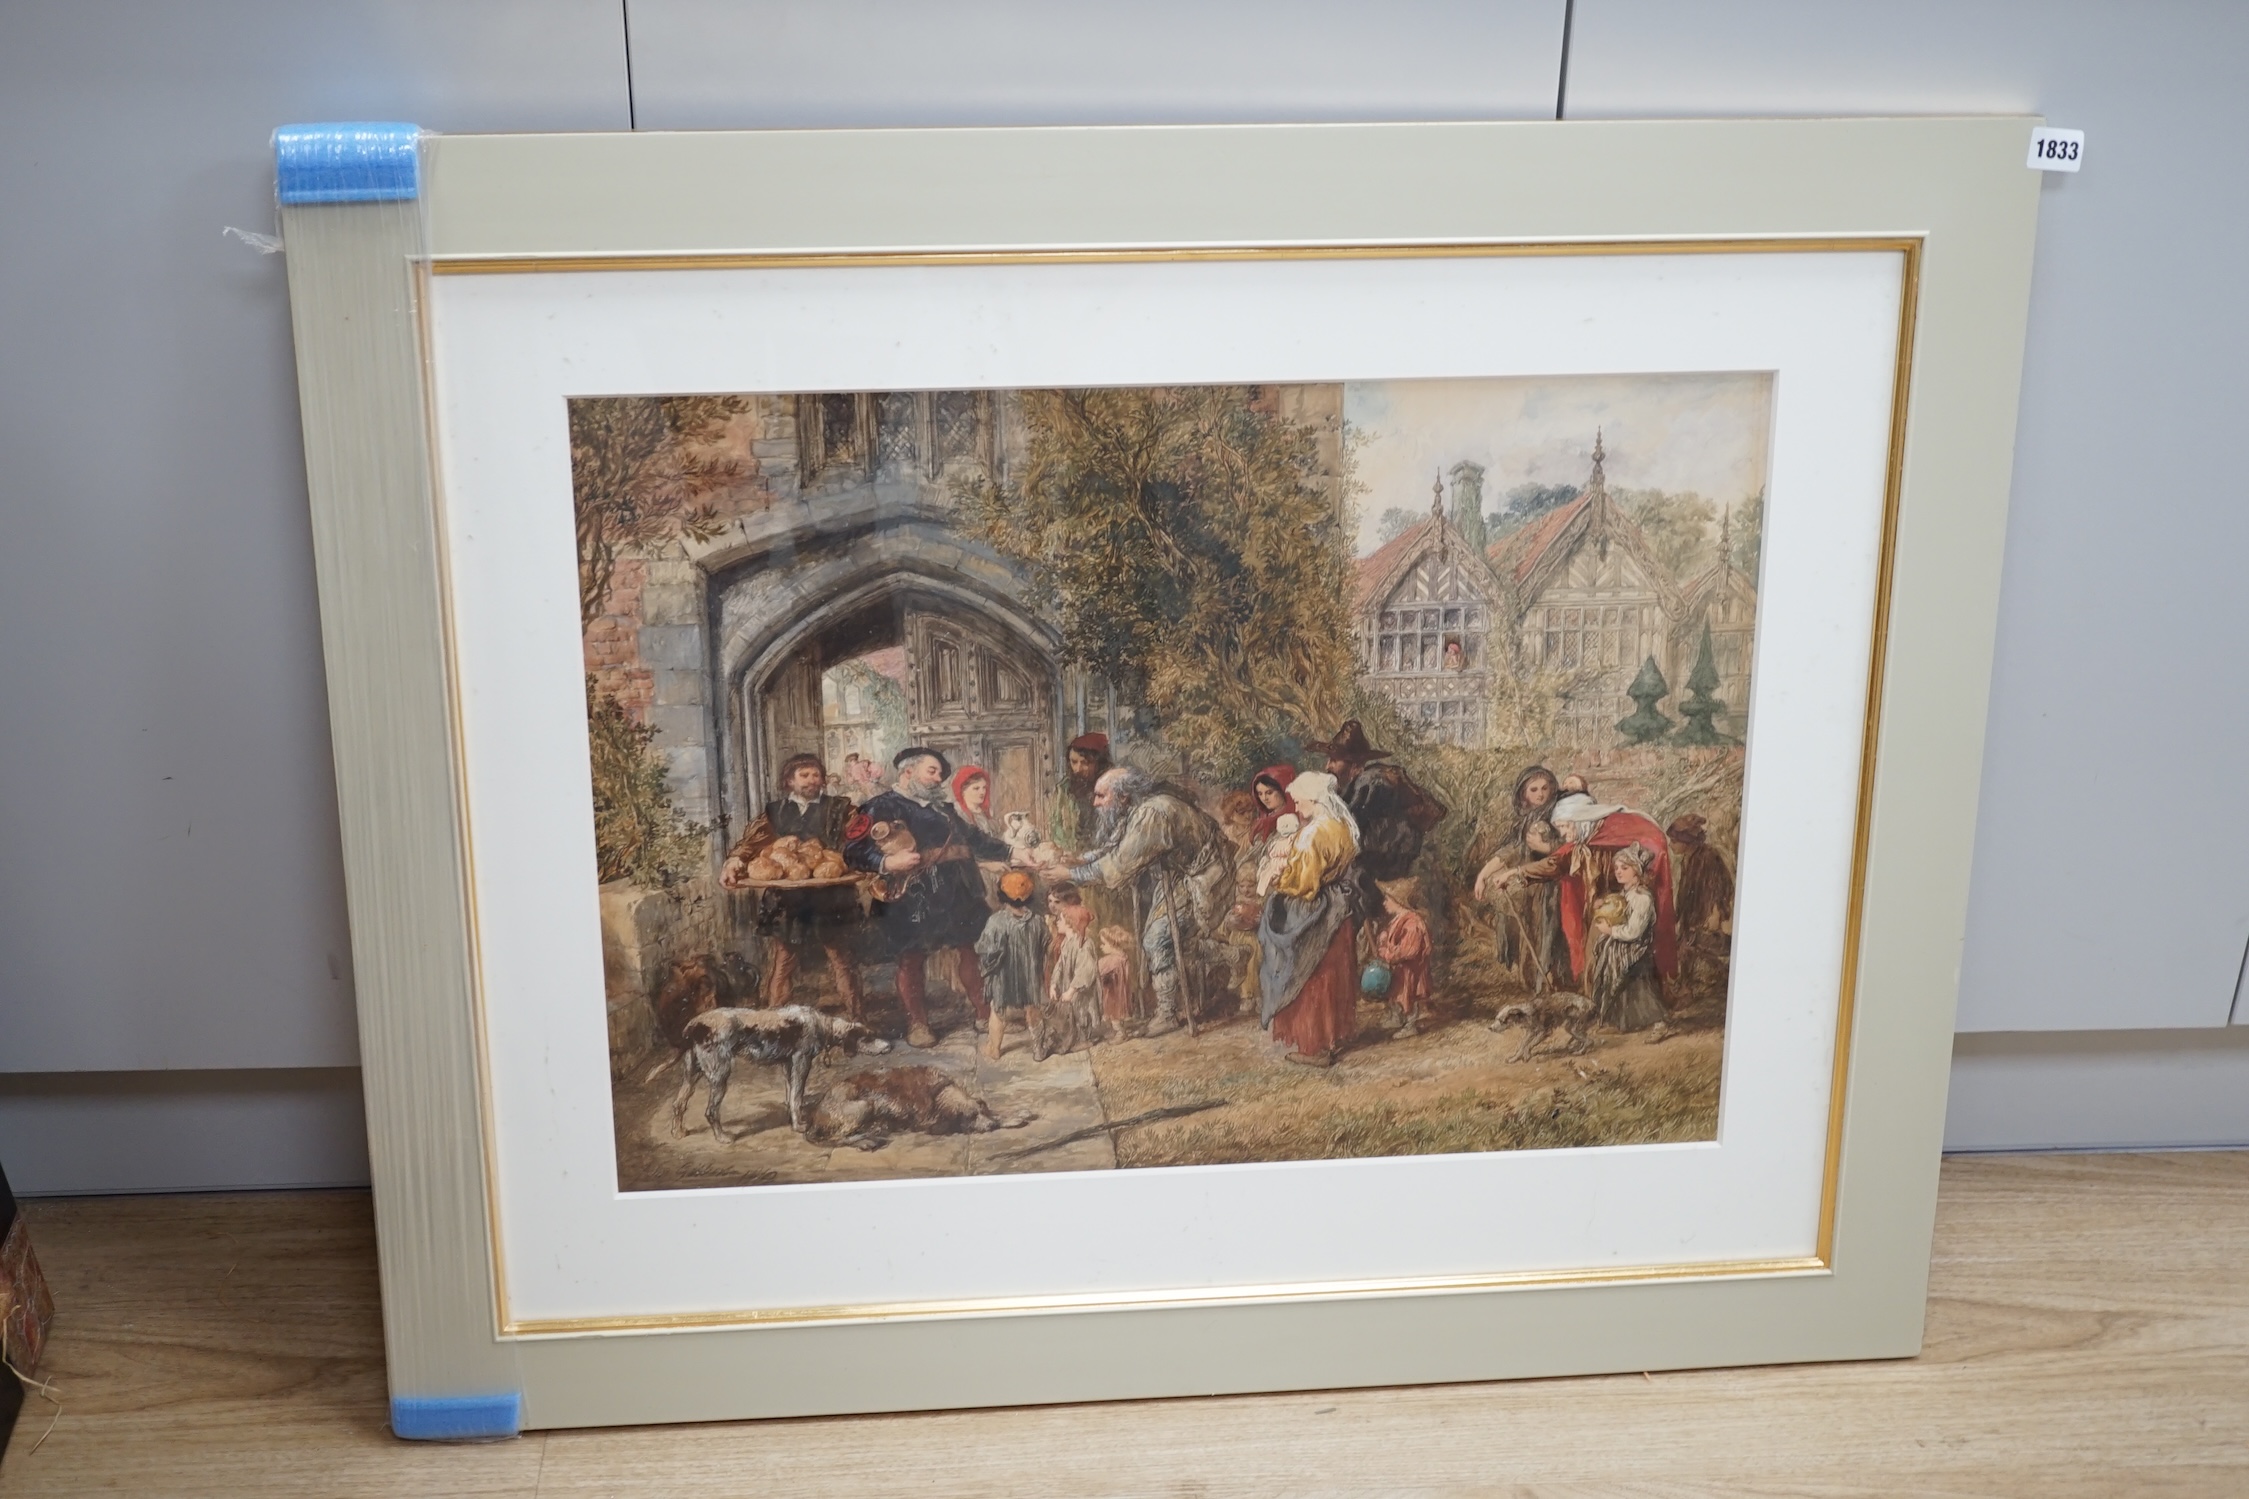 John Gibbon, watercolour, ‘Distributing alms’, signed and dated 1880, 47 x 66cm. Condition - fair